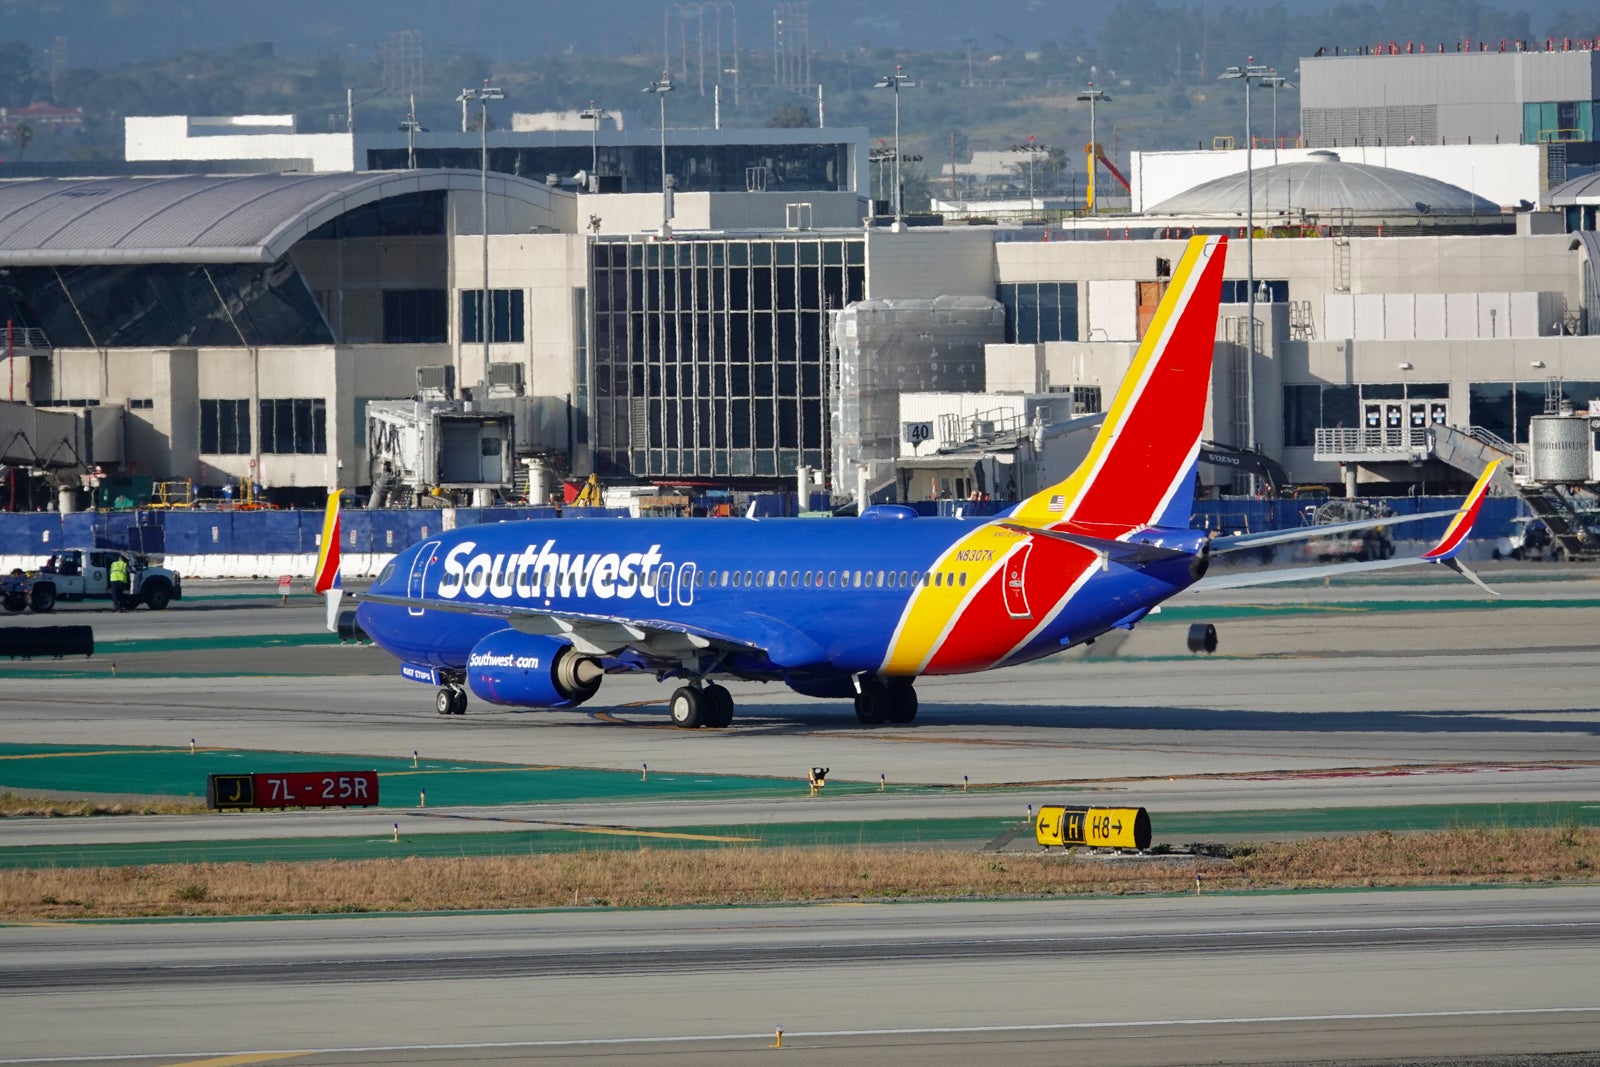 Photo of a Southwest Airlines plane taxiing on the ground